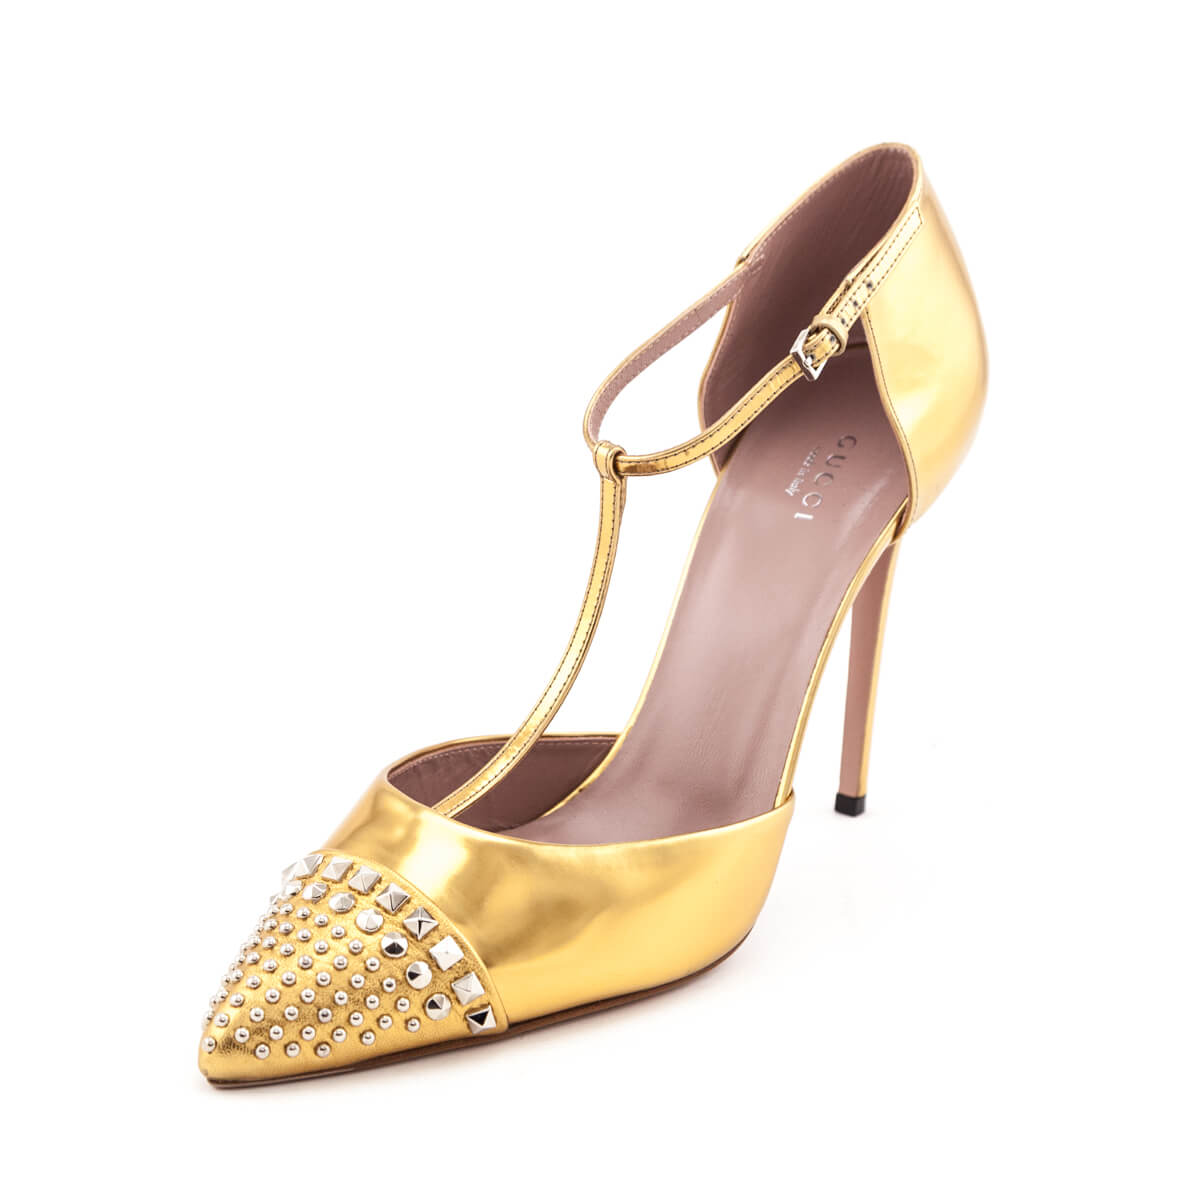 Gucci Gold Studded T-Bar Pumps Size US 11.5 | EU 41.5 - Love that Bag etc - Preowned Authentic Designer Handbags & Preloved Fashions